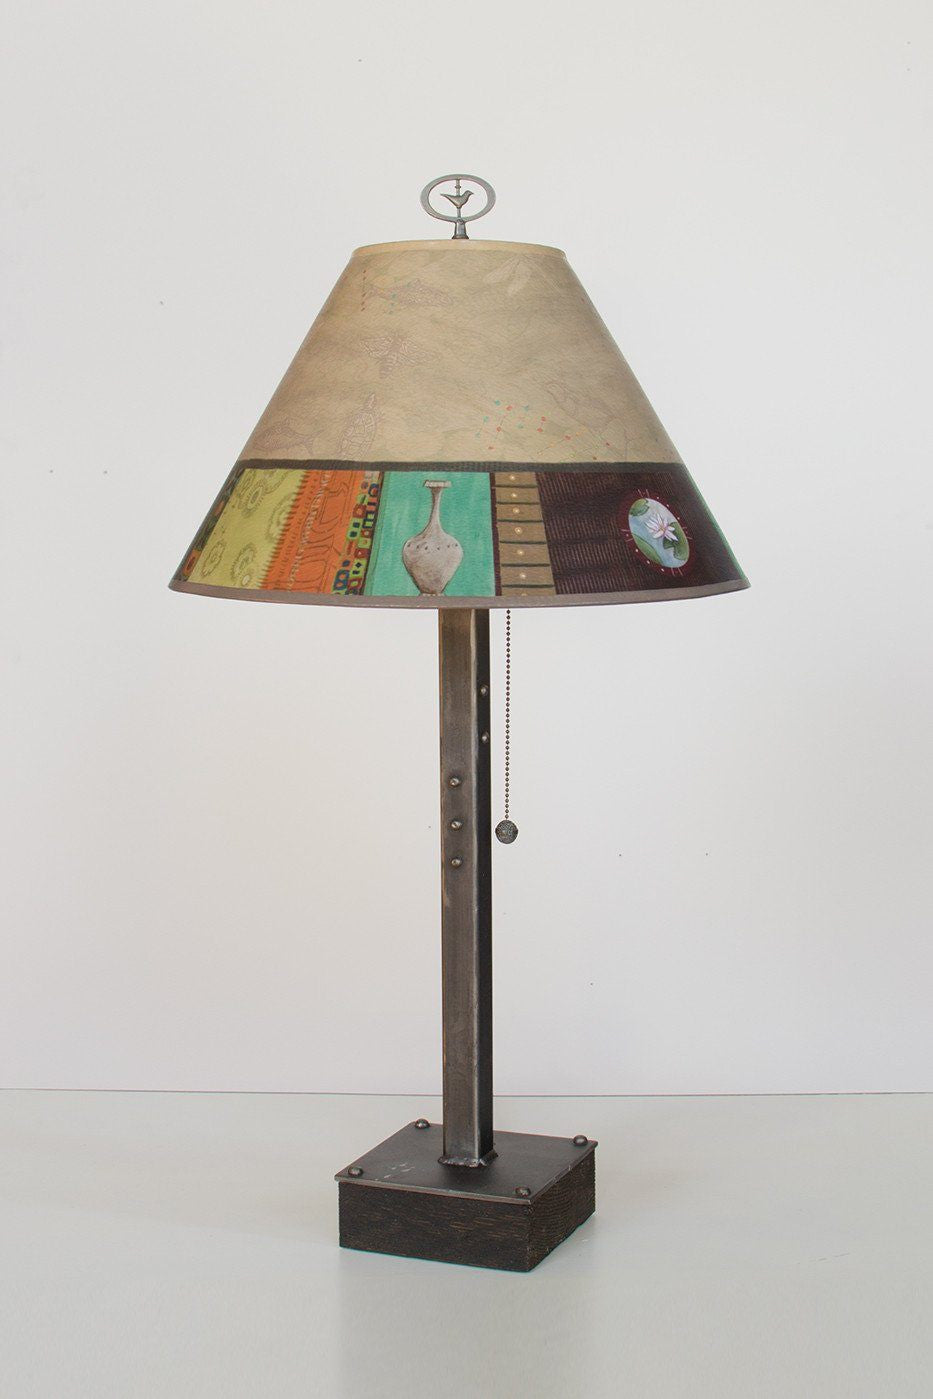 Janna Ugone & Co Table Lamps Steel Table Lamp on Wood with Medium Conical Shade in Linen Match